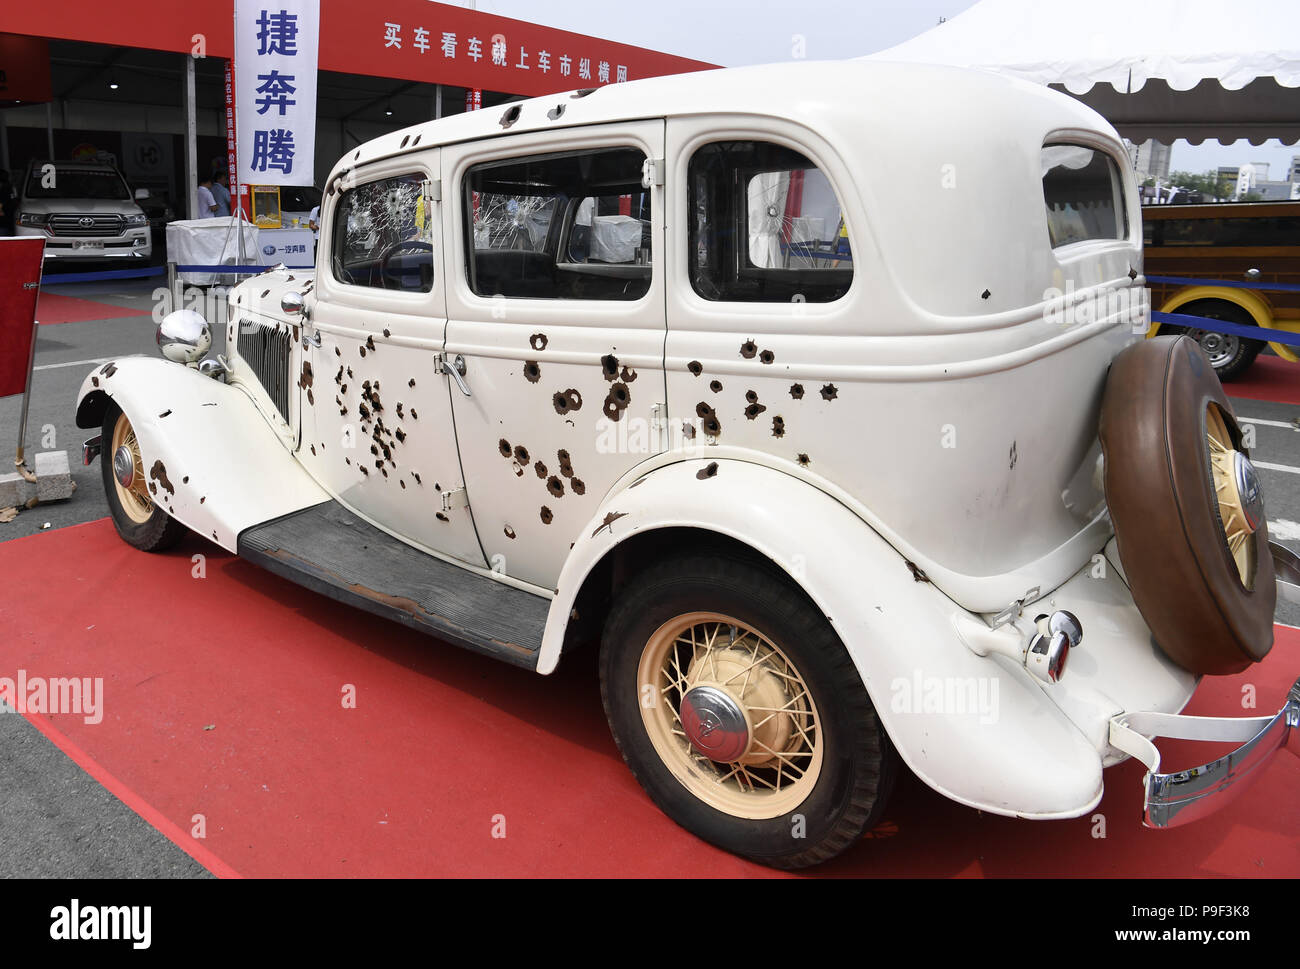 Changchun Changchun China 18th July 2018 Changchun China A Ford 730 De Luxe Sedan Can Be Seen At The 15th Changchun Auto Expo In Changchun Northeast China S Jilin Province Credit Sipa Asia Zuma Wire Alamy